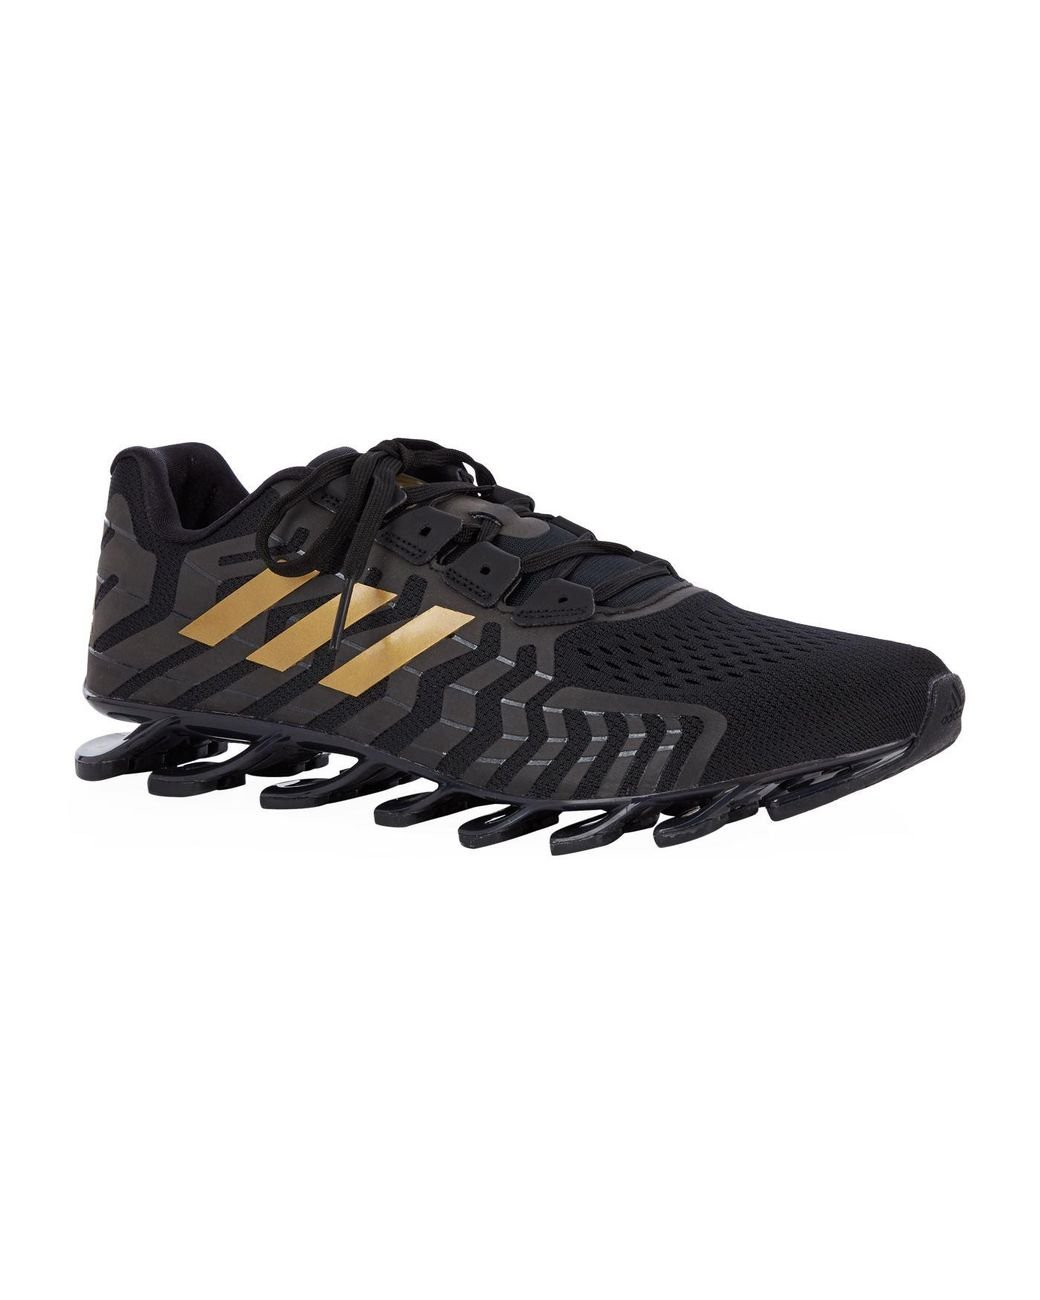 adidas Springblade Pro Trainers in Black Men Lyst